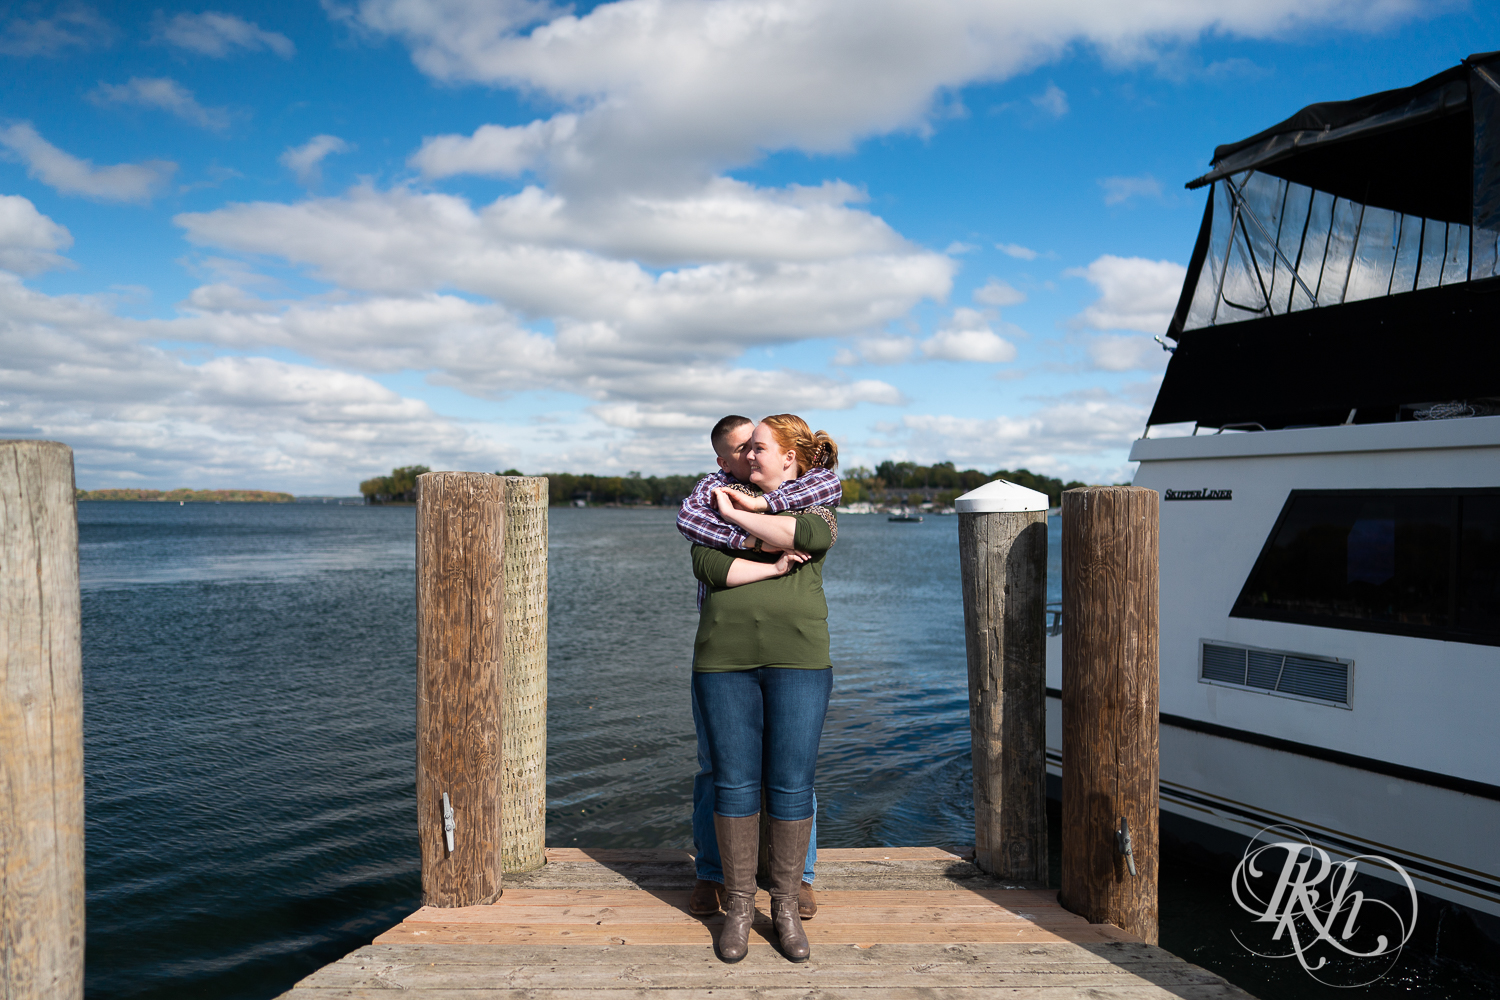 Man in flannel and jeans hugs woman in sweater and jeans on a dock in Excelsior, Minnesota.